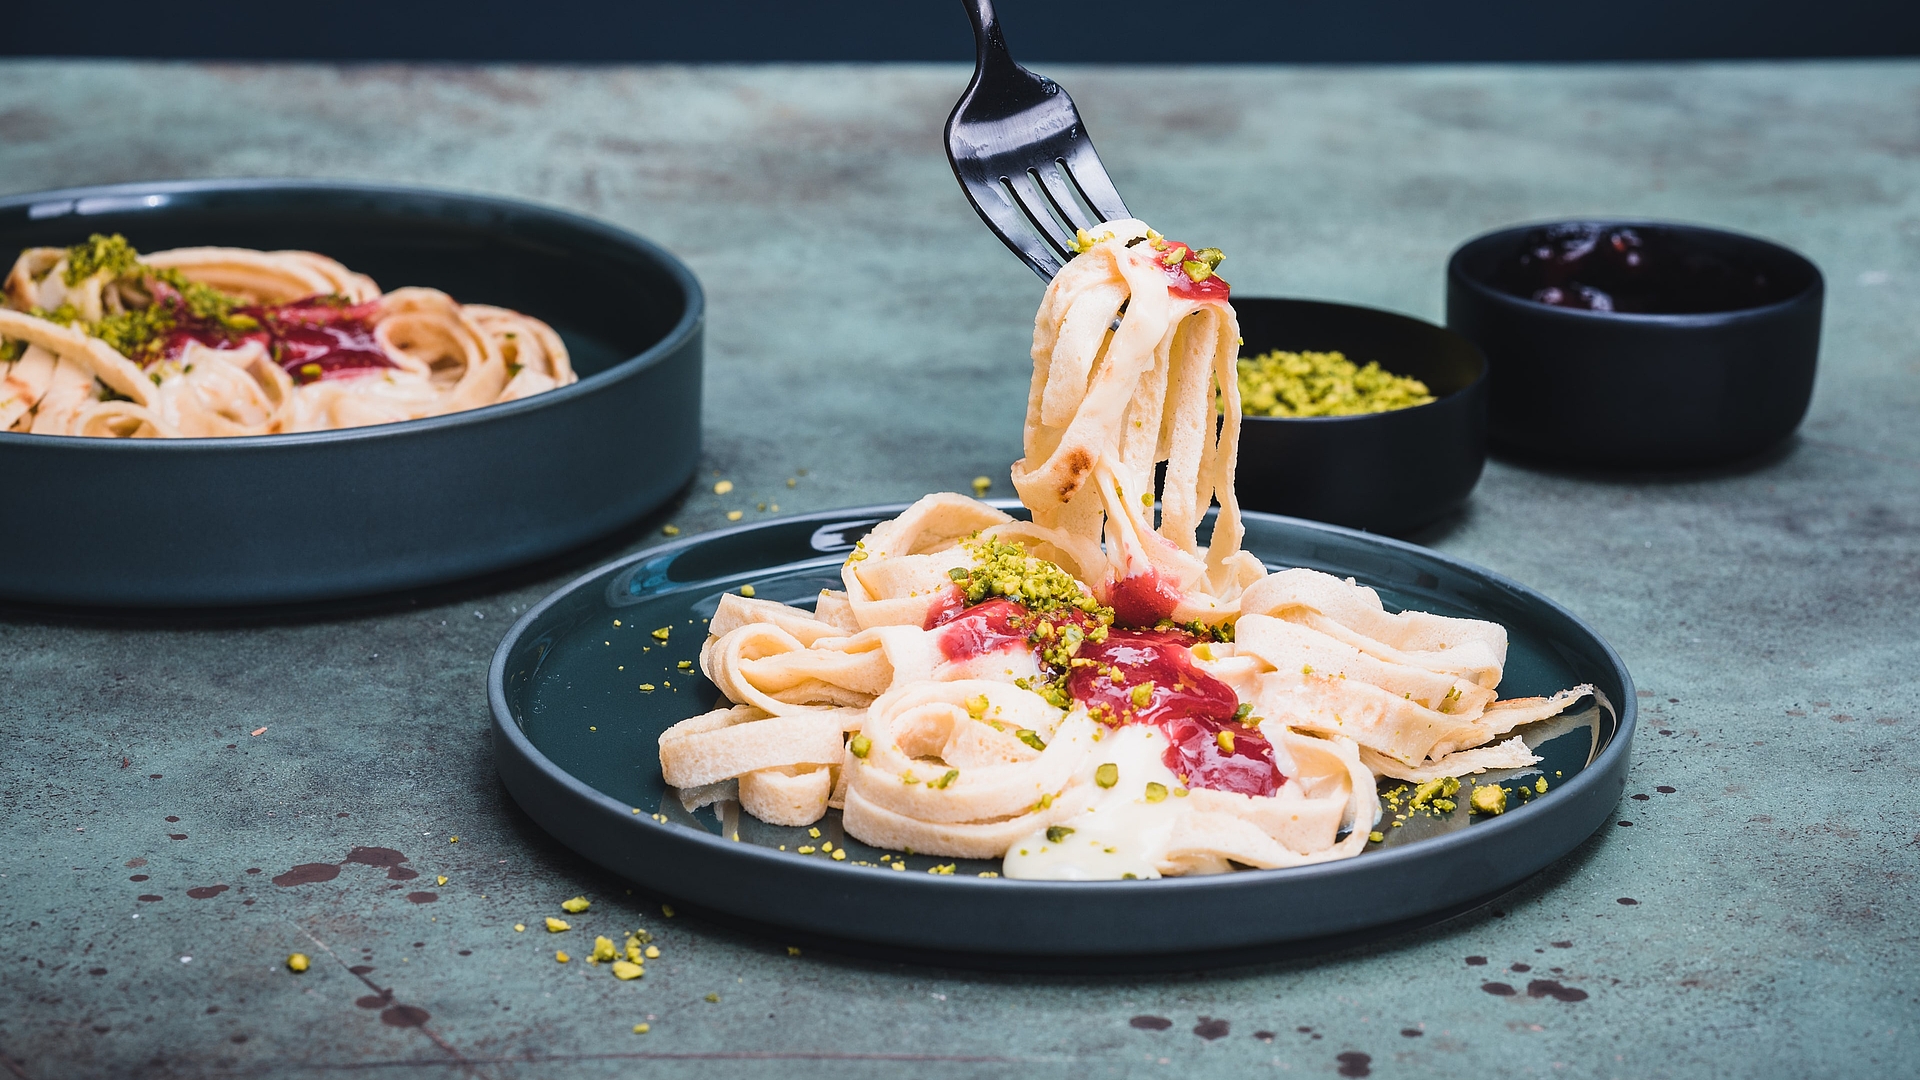 Sweet tagliatelle with raspberry sauce, white chocolate and pistachios